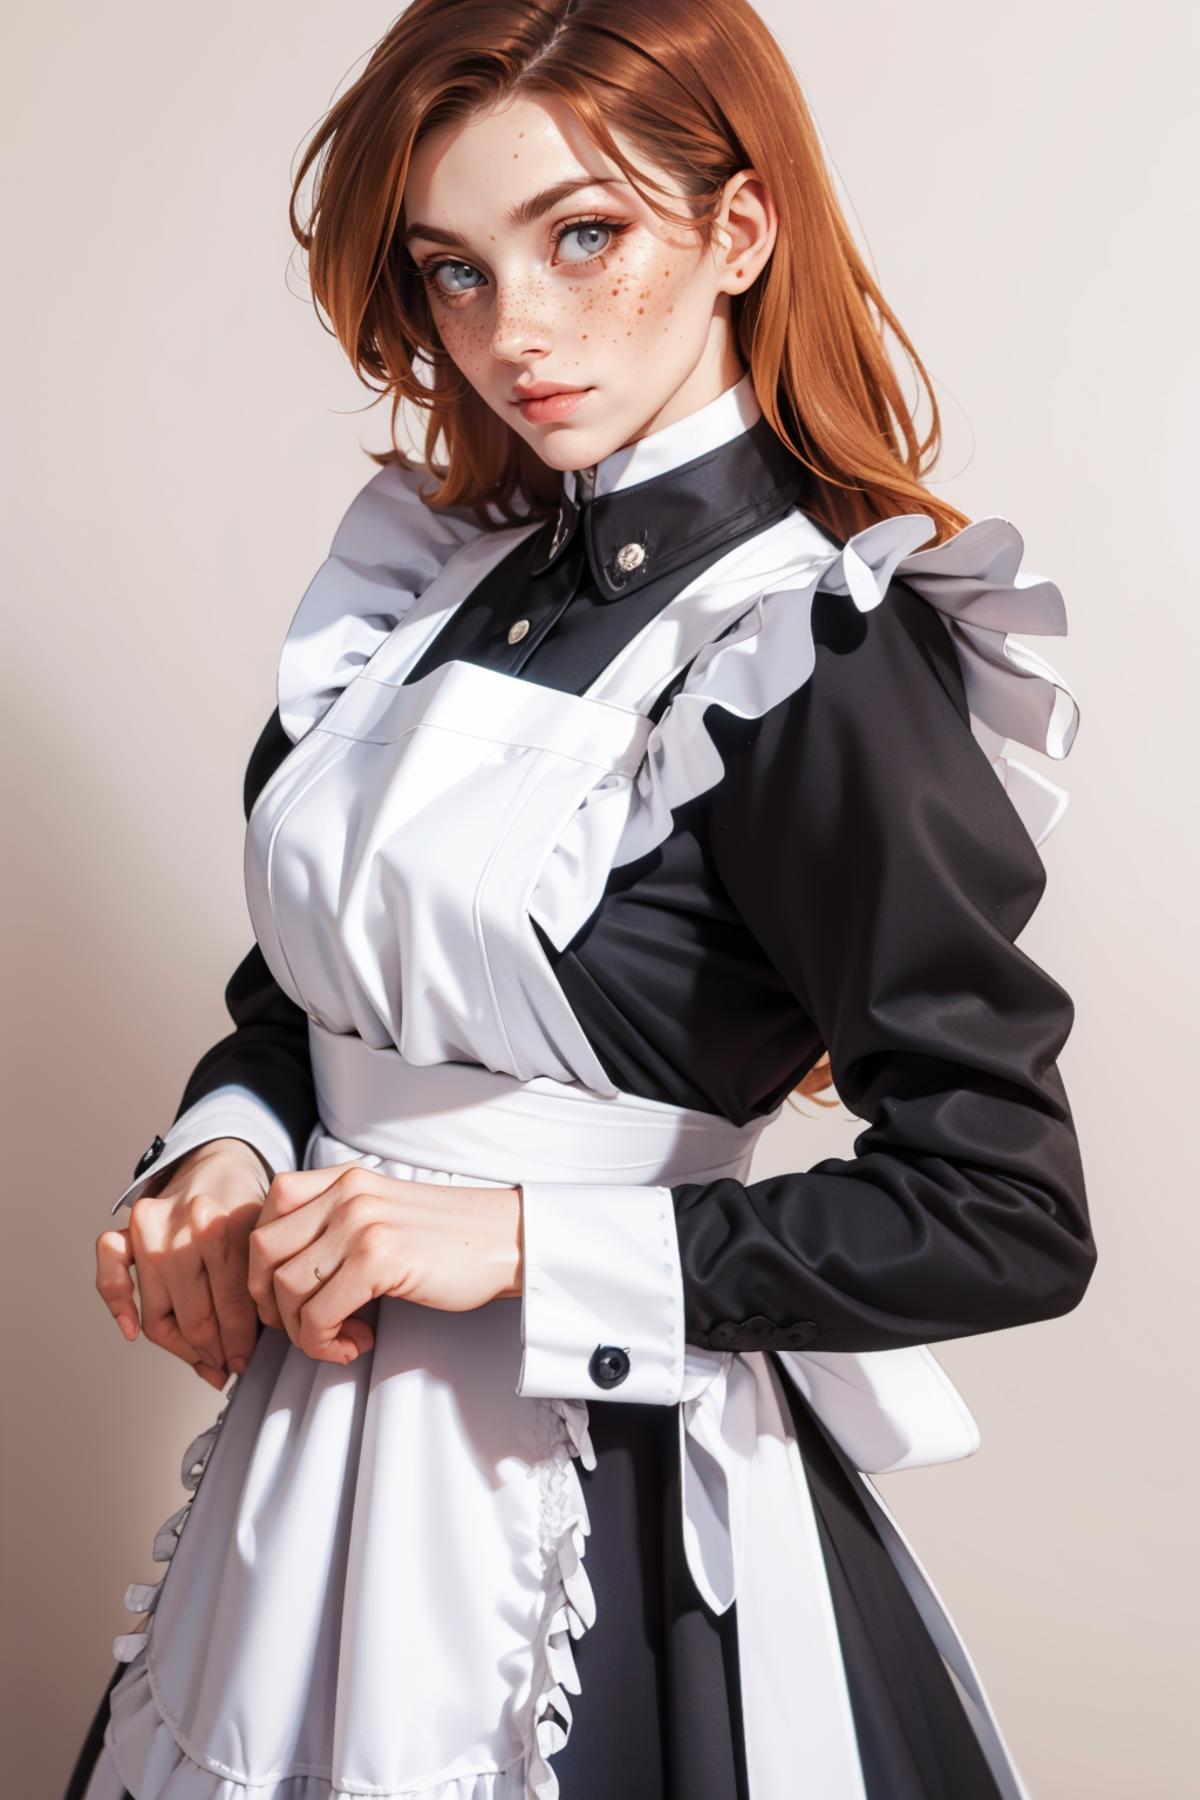 A woman in a maid uniform posing for the camera.